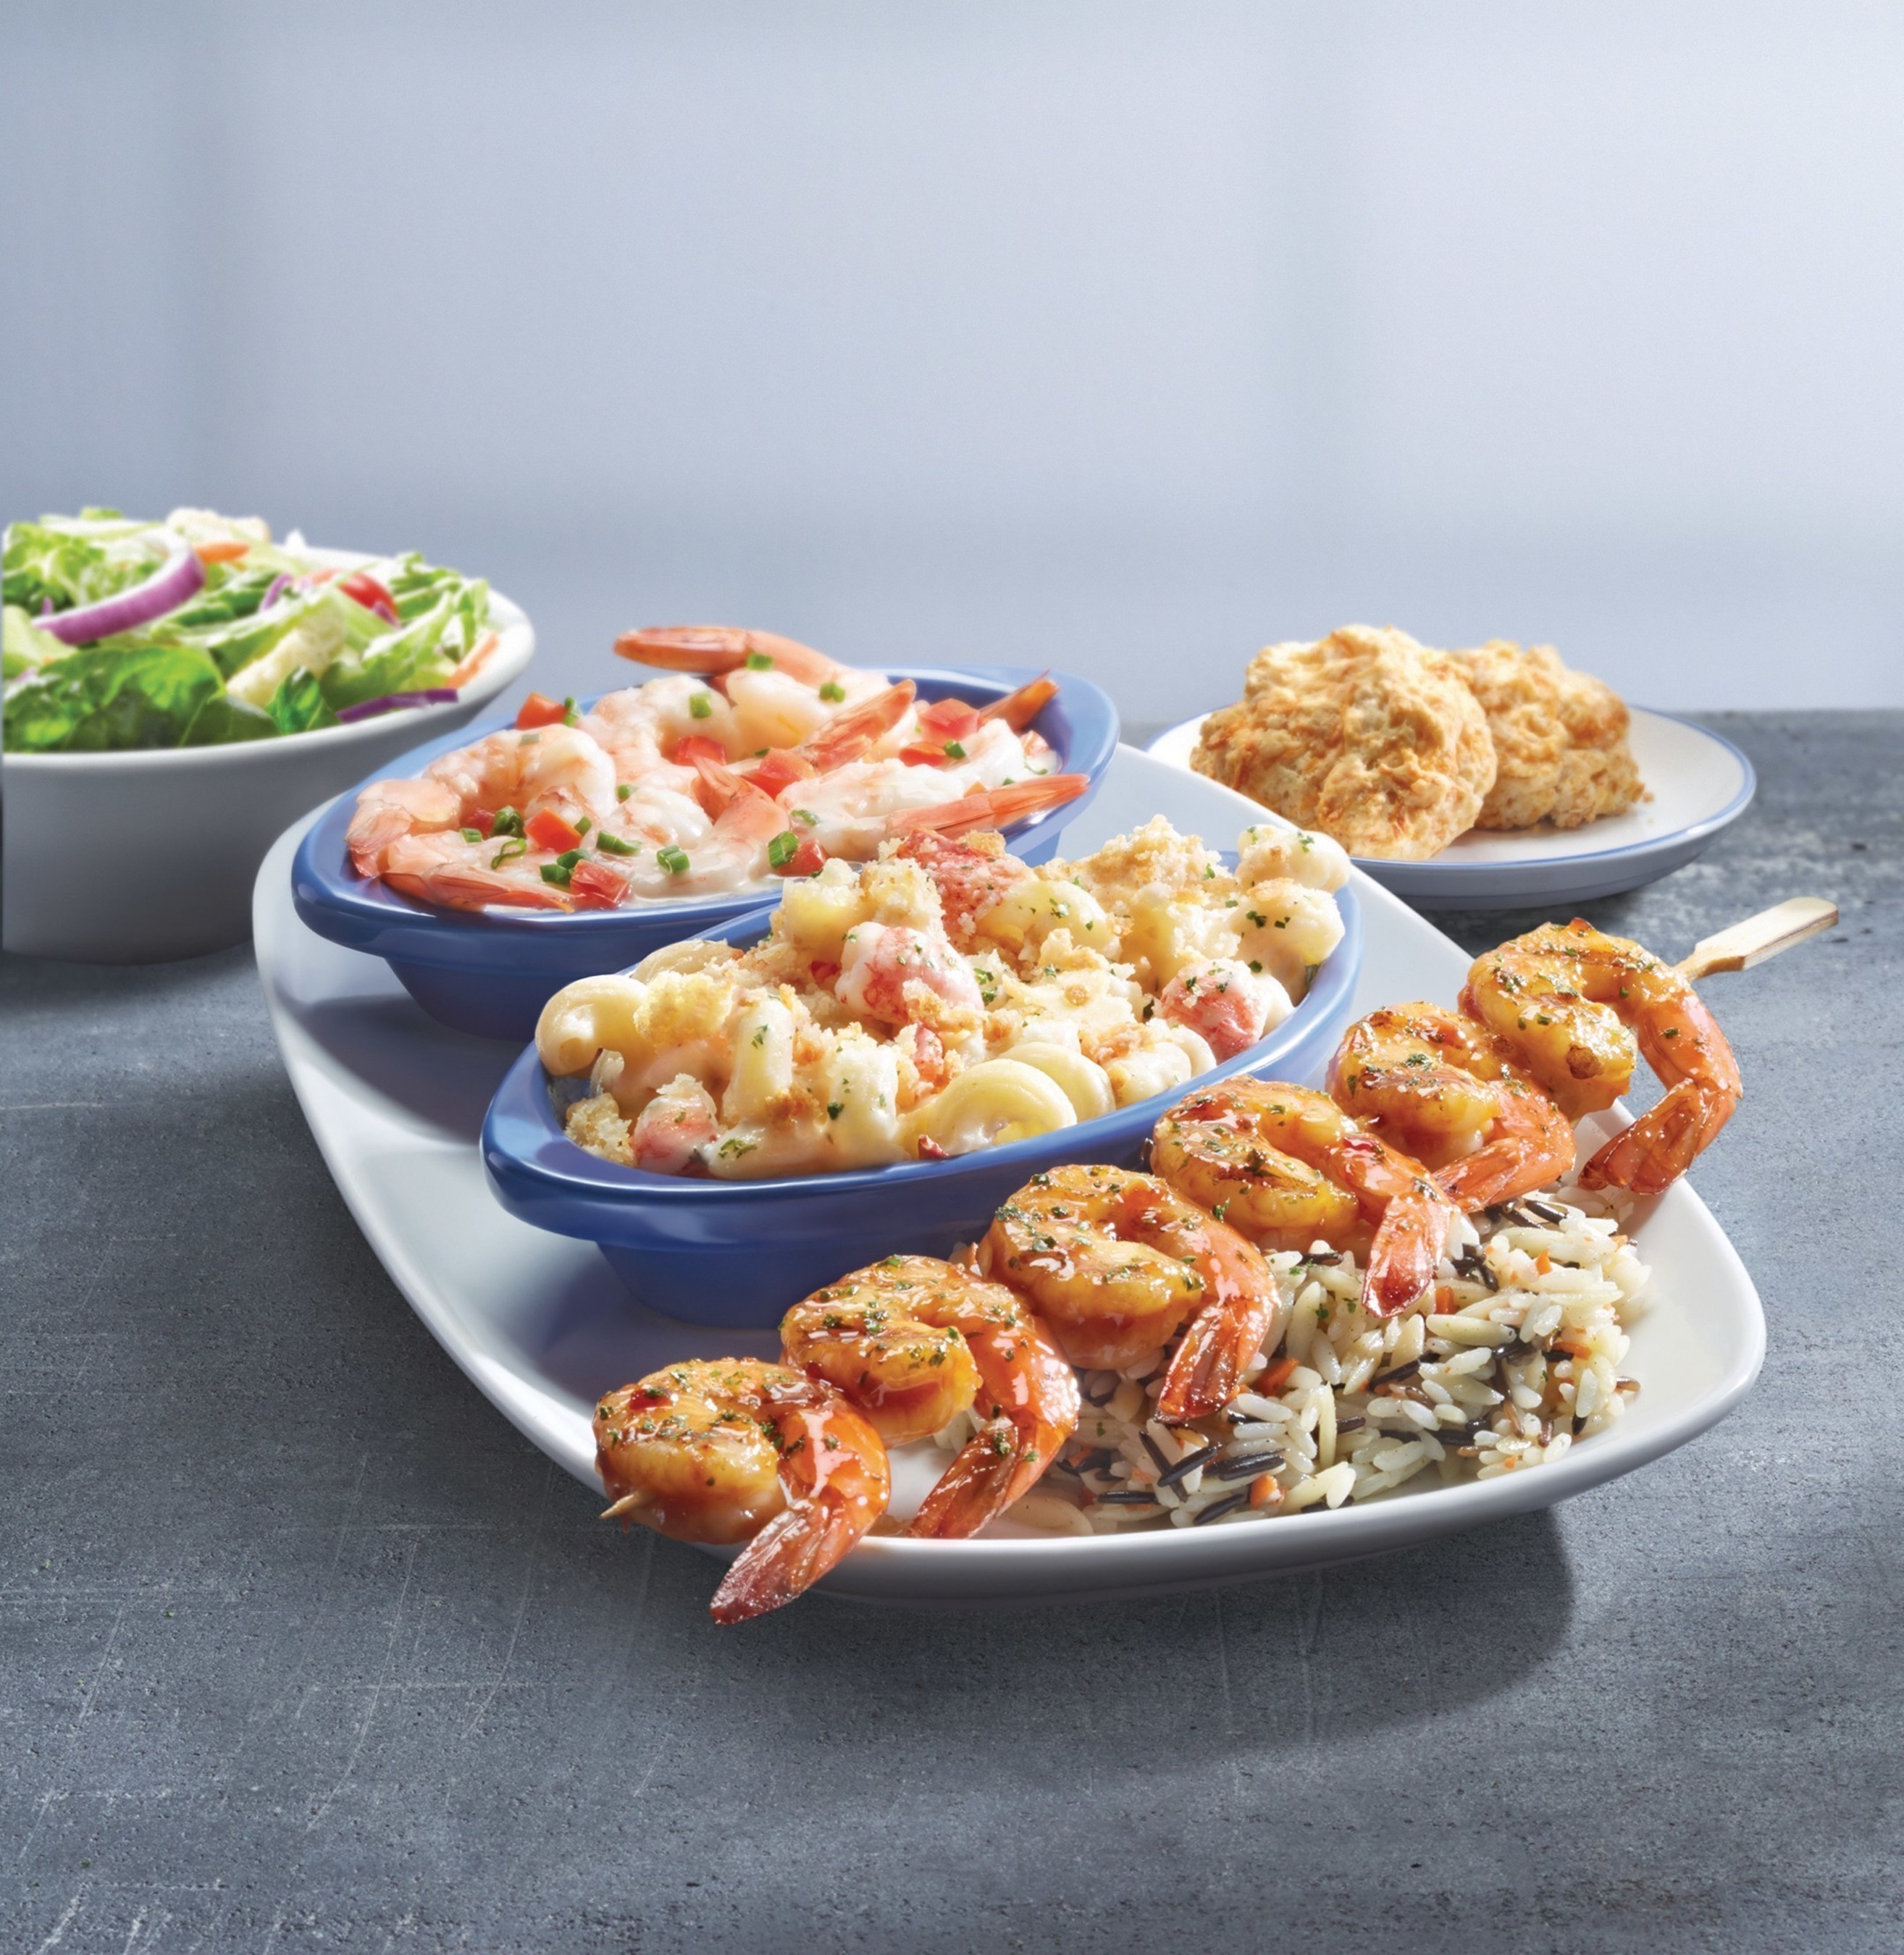 Red Lobster's Create Your Own Seafood Trio event lets guests mix and match flavors and preparations to build the perfect plate, like the NEW! Wood-Grilled Spicy Tennessee Bourbon Shrimp, Baked Lobster Alfredo and Lemon Garlic Butter Shrimp.